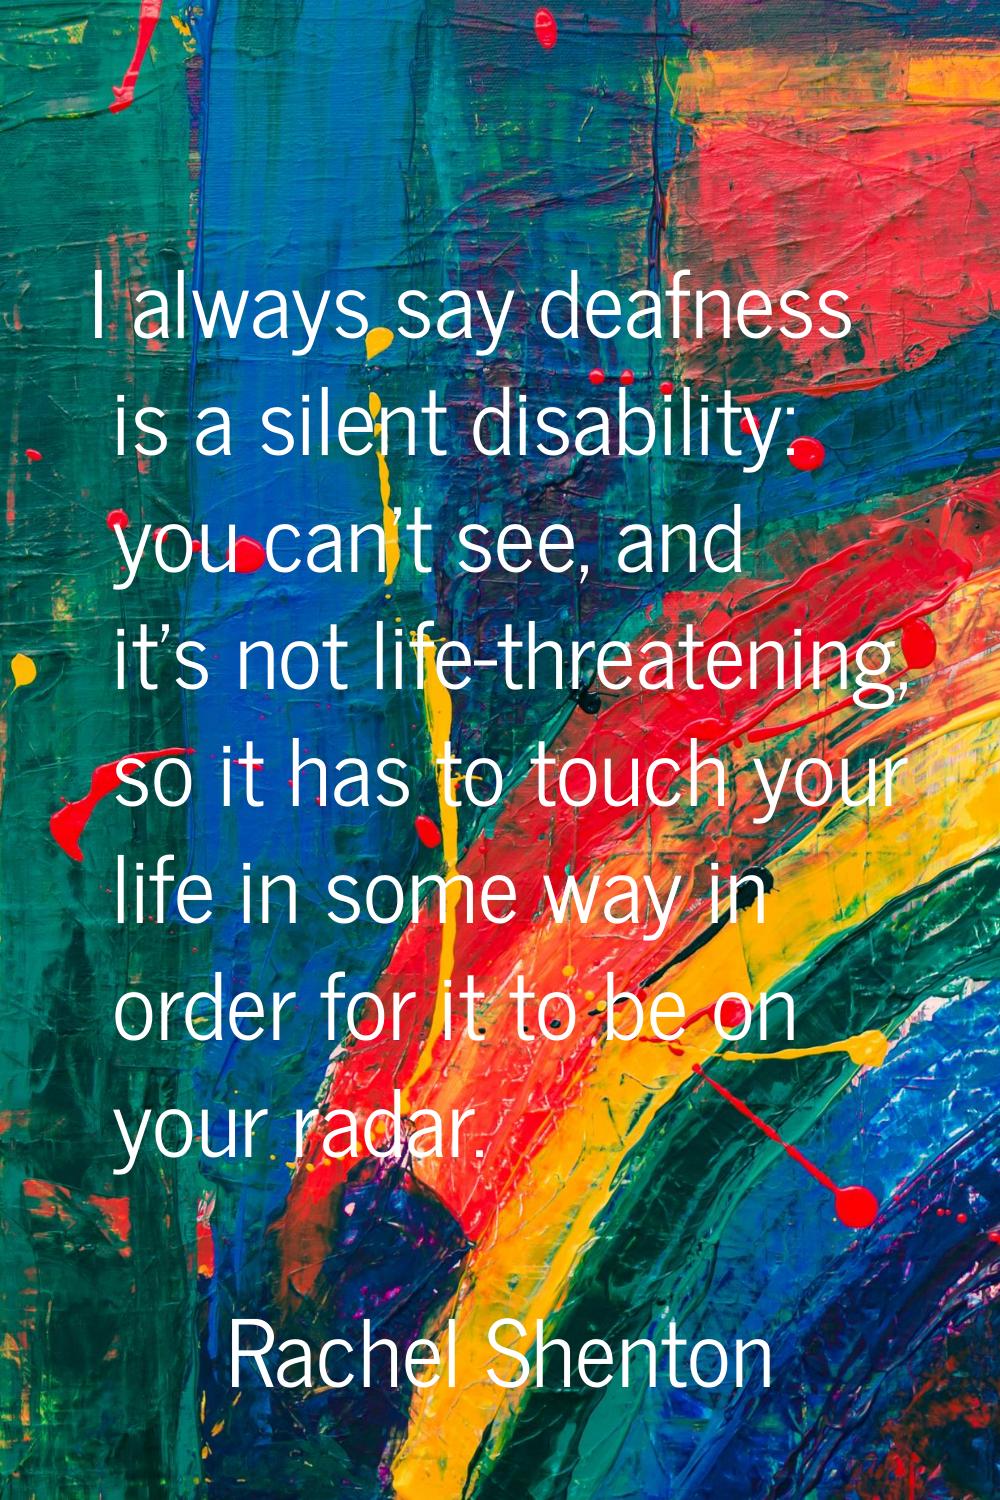 I always say deafness is a silent disability: you can't see, and it's not life-threatening, so it h